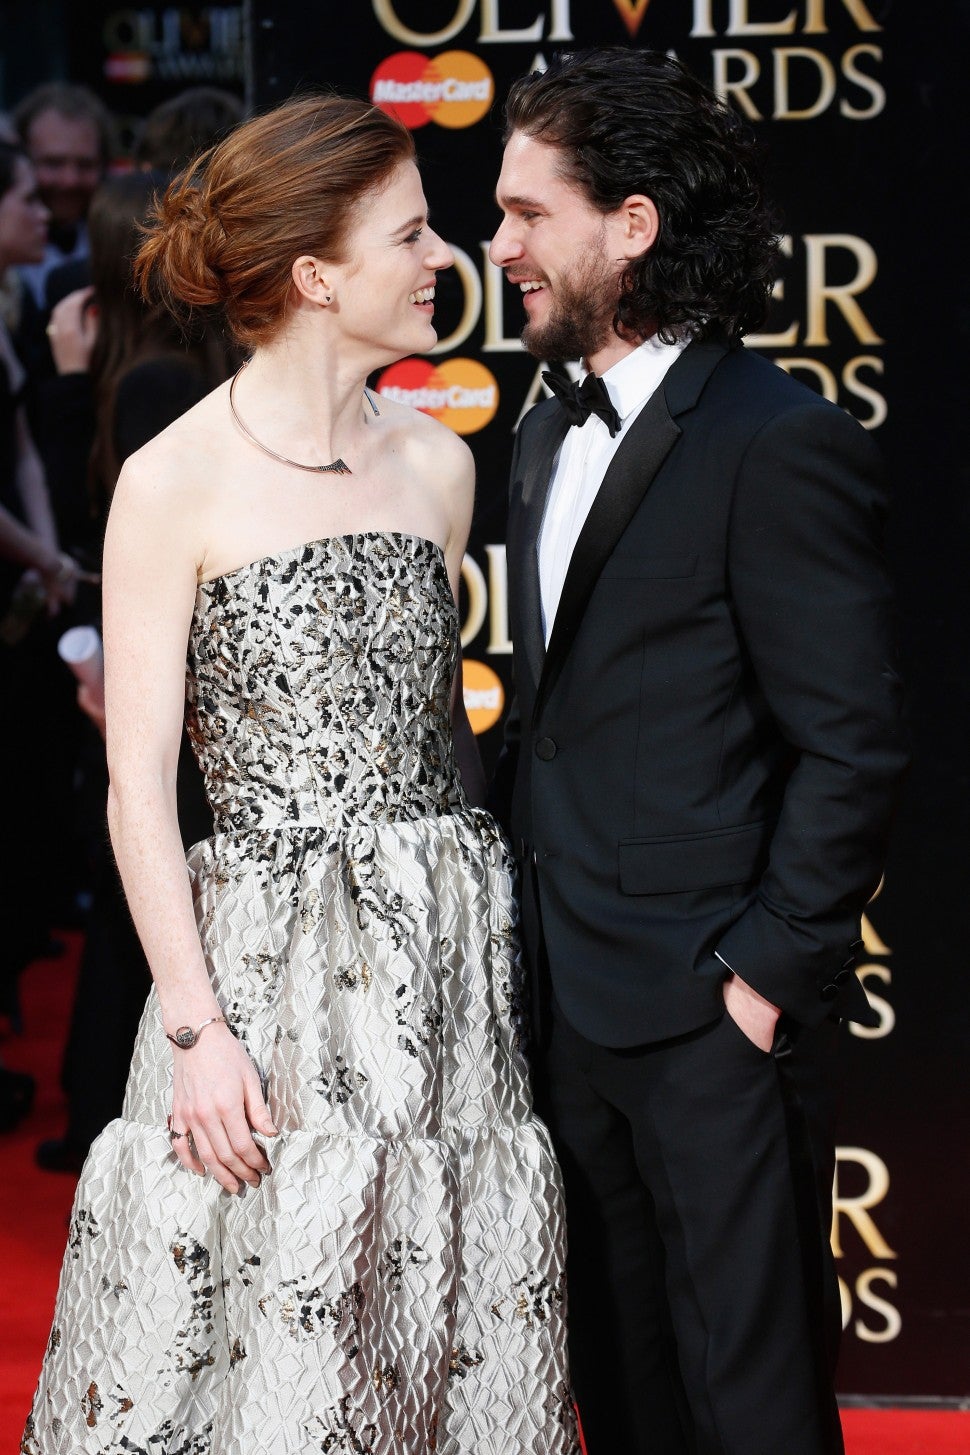 Rose Leslie and Kit Harington attend The Olivier Awards with Mastercard at The Royal Opera House on April 3, 2016 in London, England.